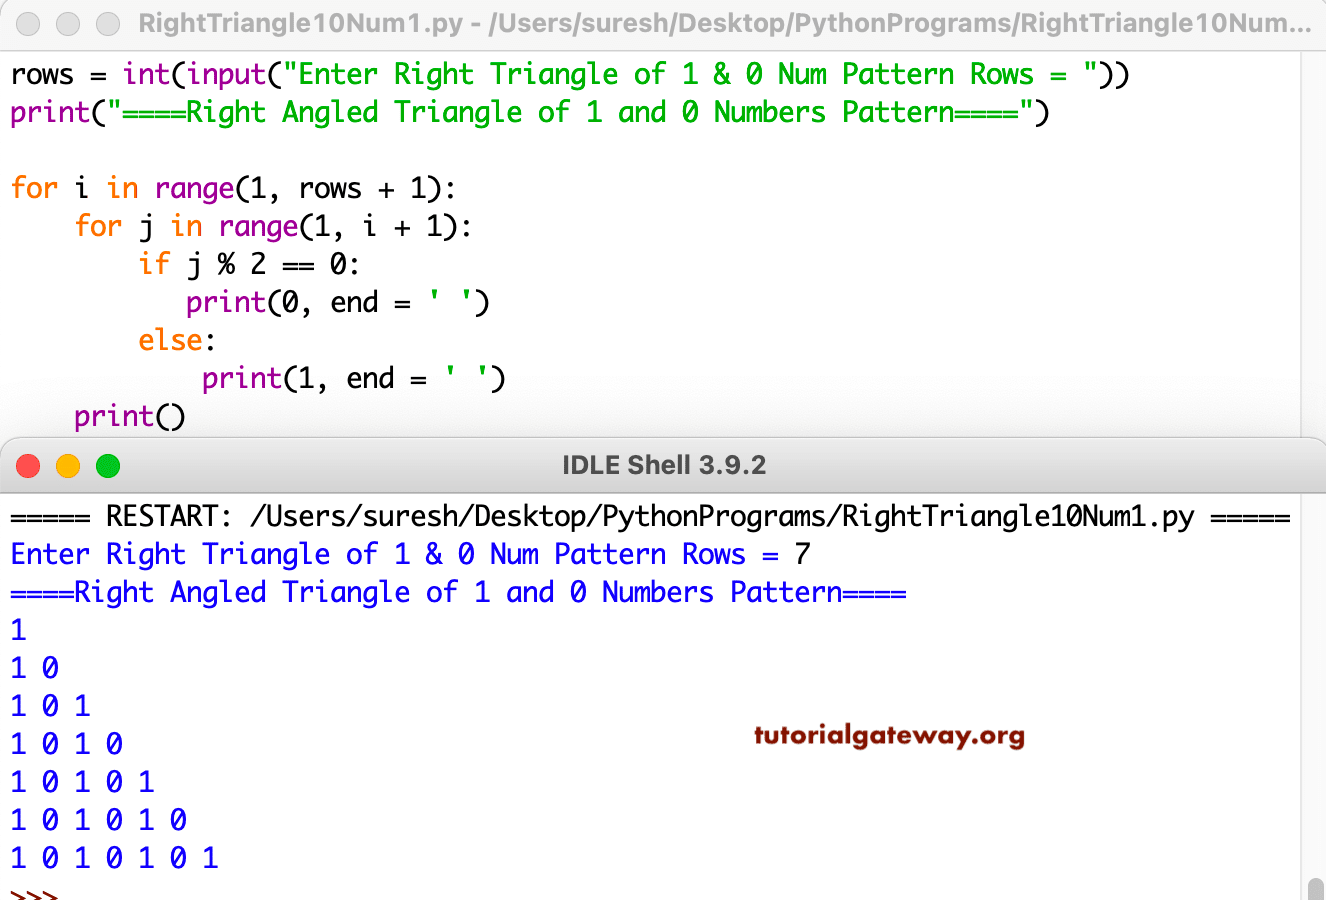 Python Program to Print Right Triangle of 1 and 0